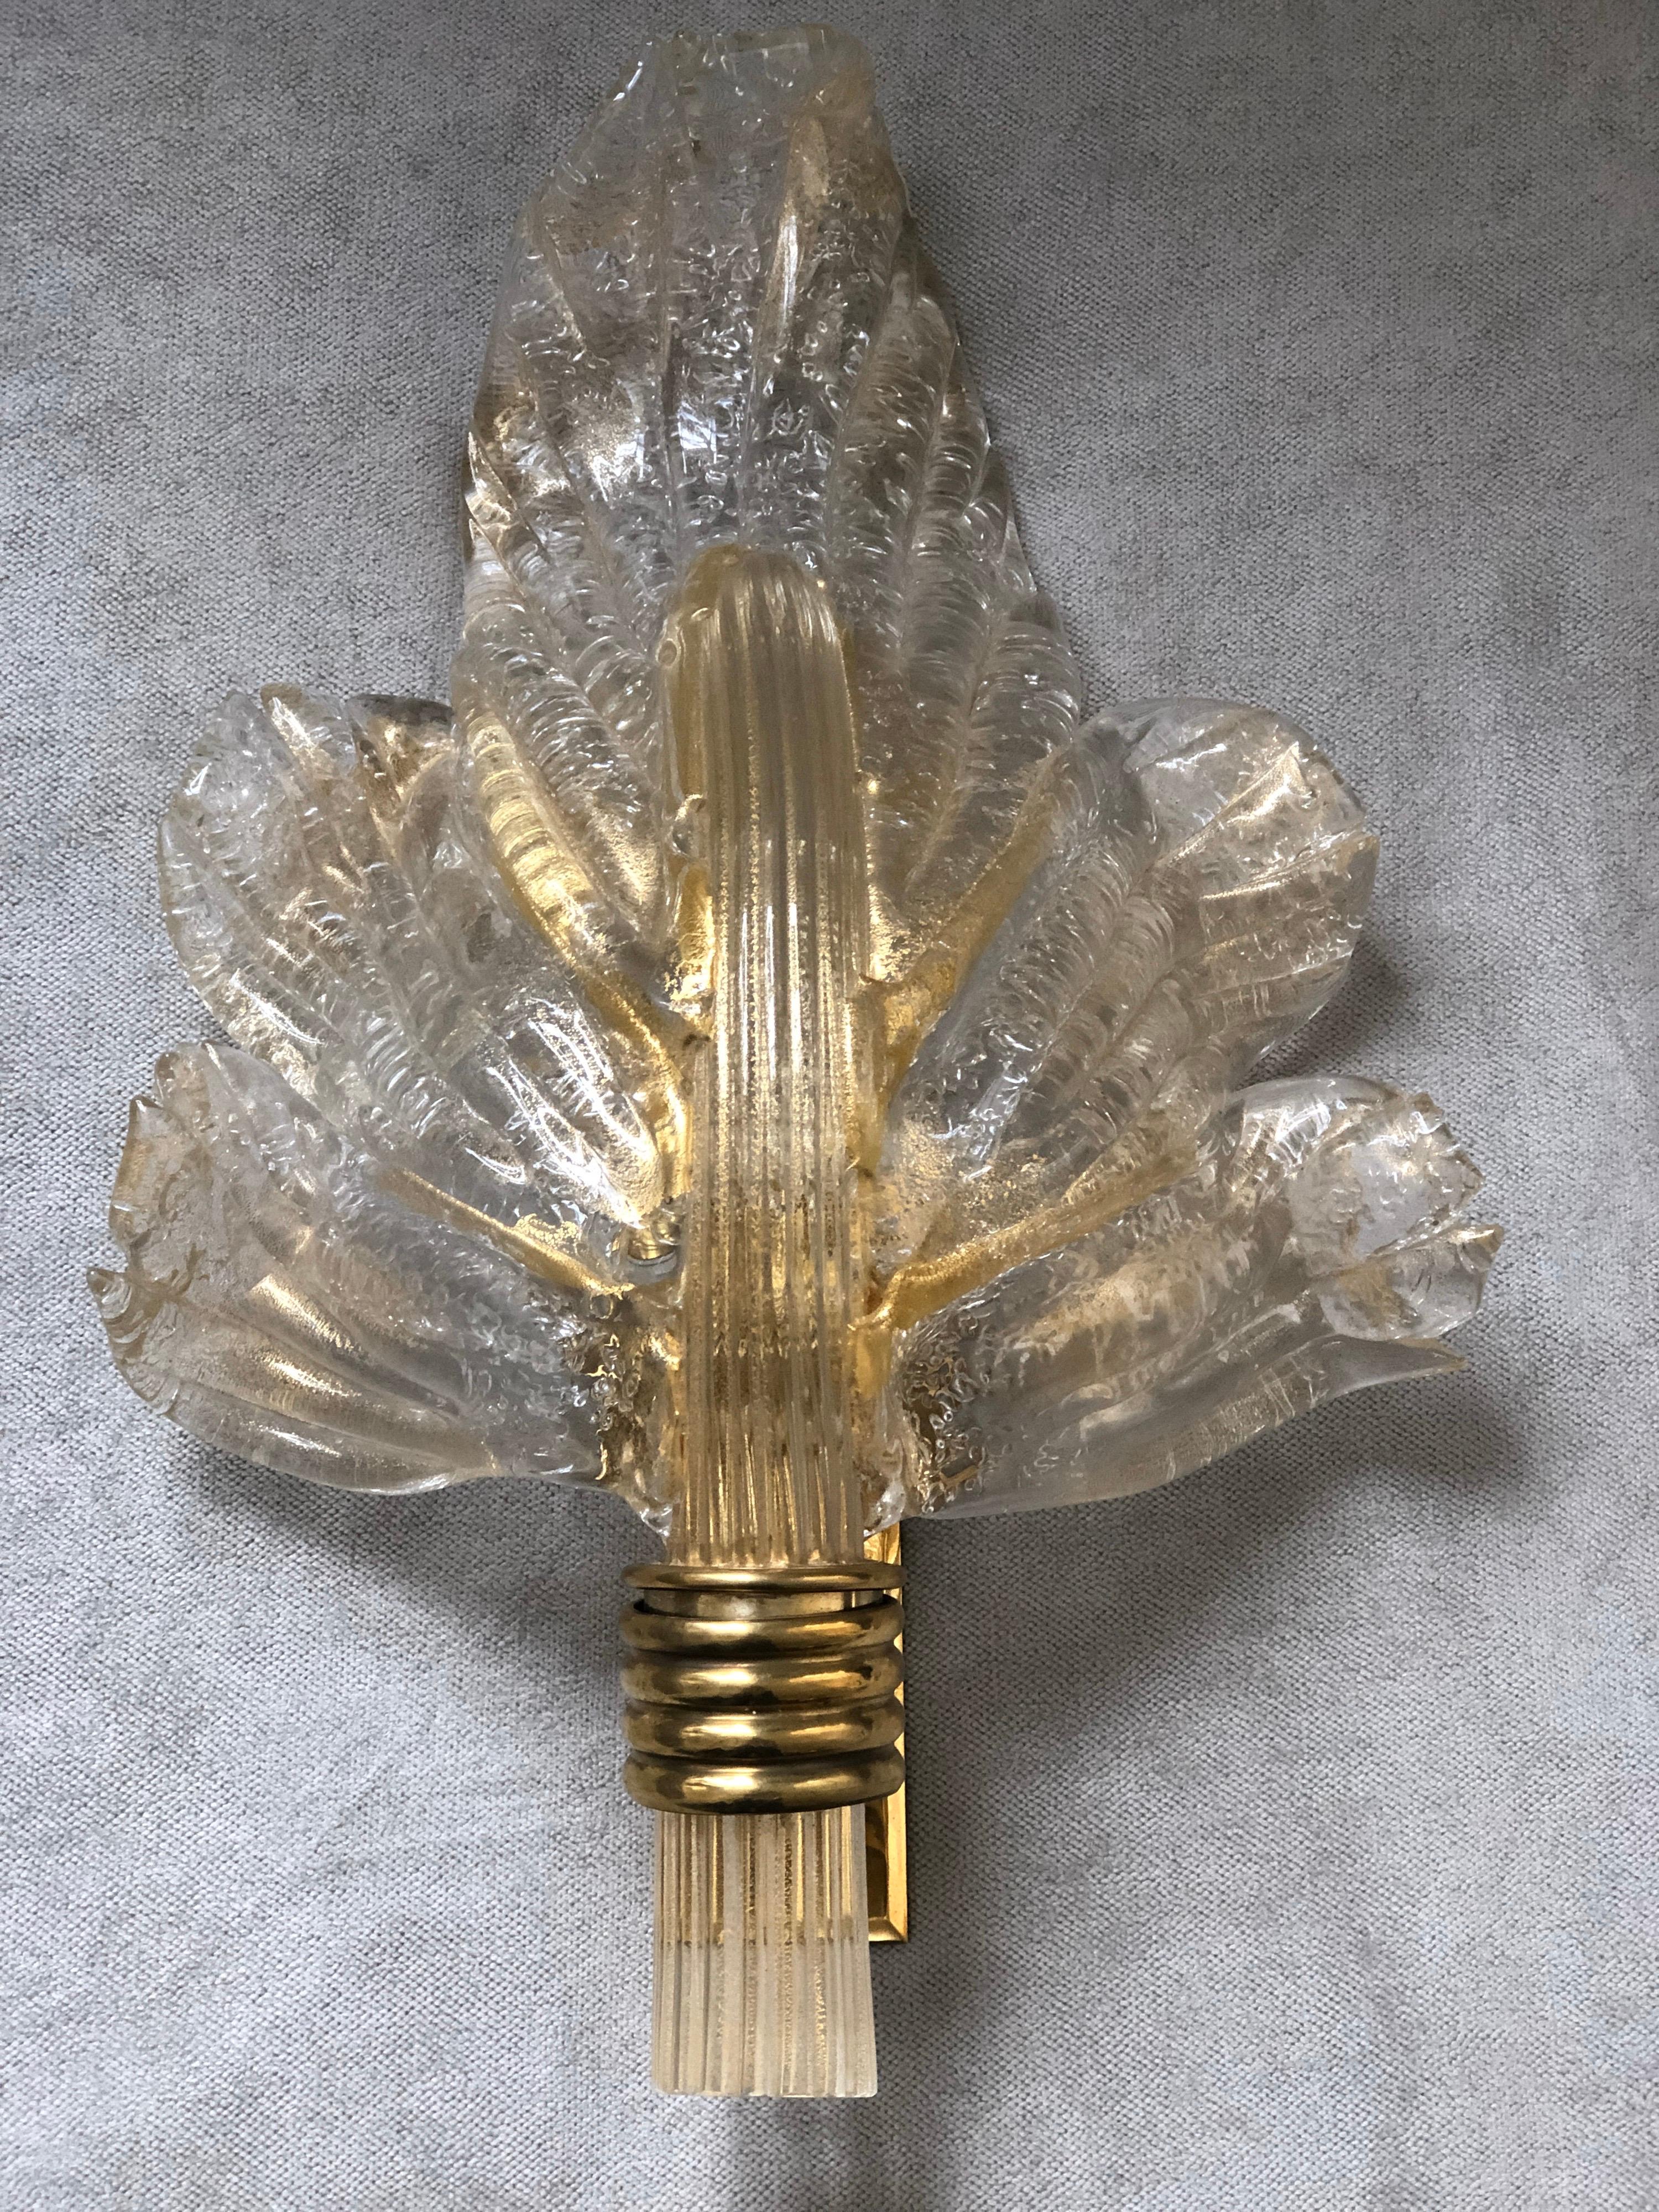 Italian Pair of Murano 24-Karat Gold Flaked Crystal Wall Lights Leaf by Segusso, 1950s